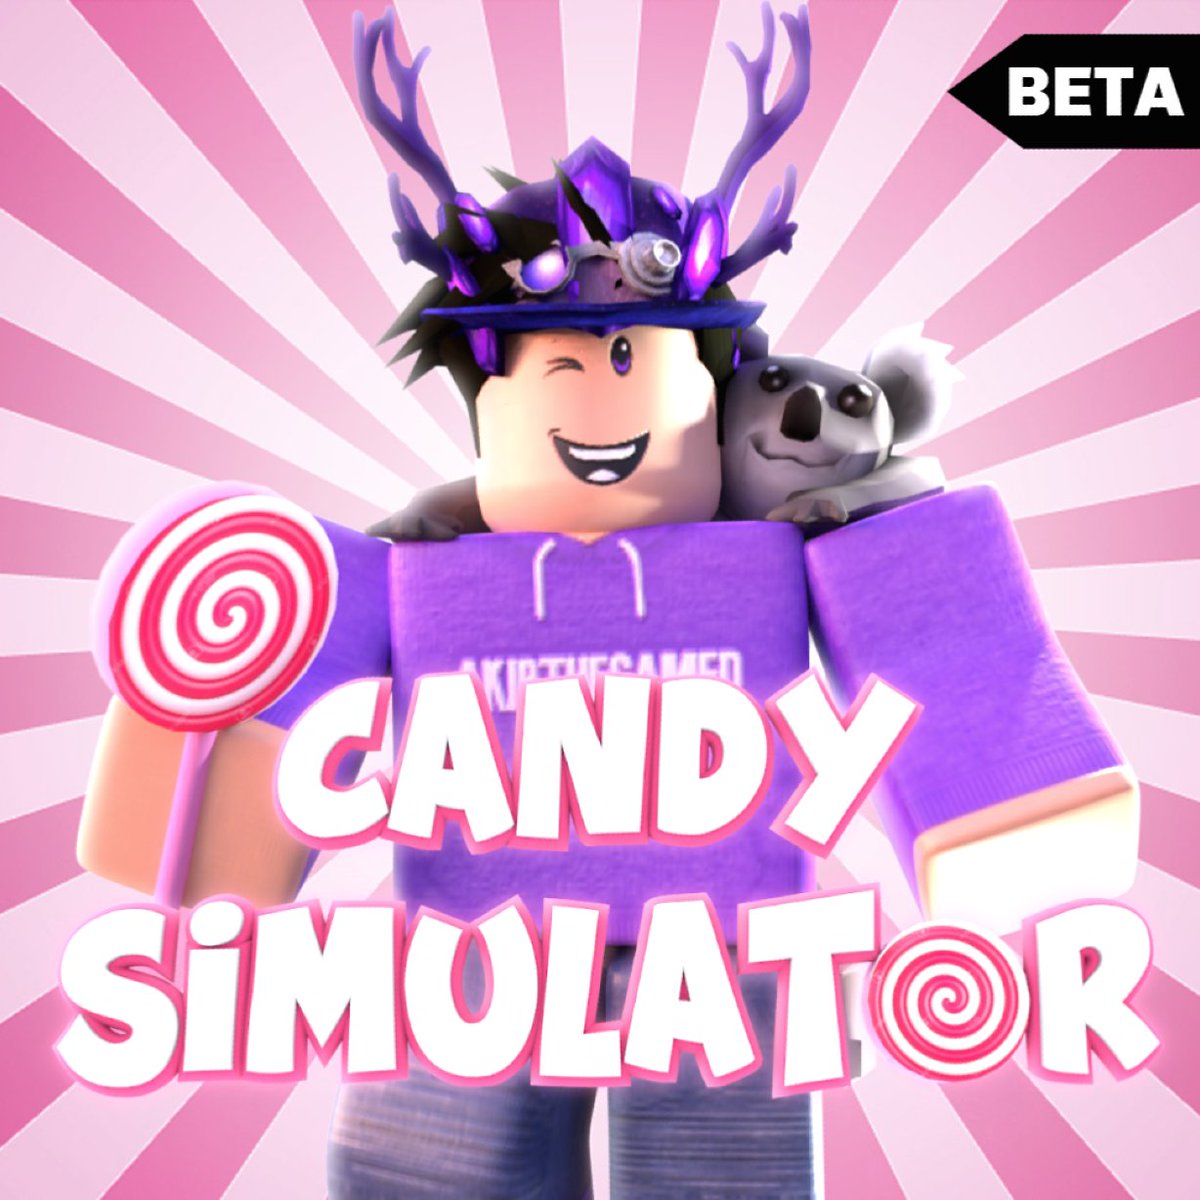 Akibrblx On Twitter Heres A Game Icon For My Roblox Game 3 And Are Greatly Appreciated Roblox Robloxdev Robloxgfx Robloxarts Https T Co Hrisc5kar8